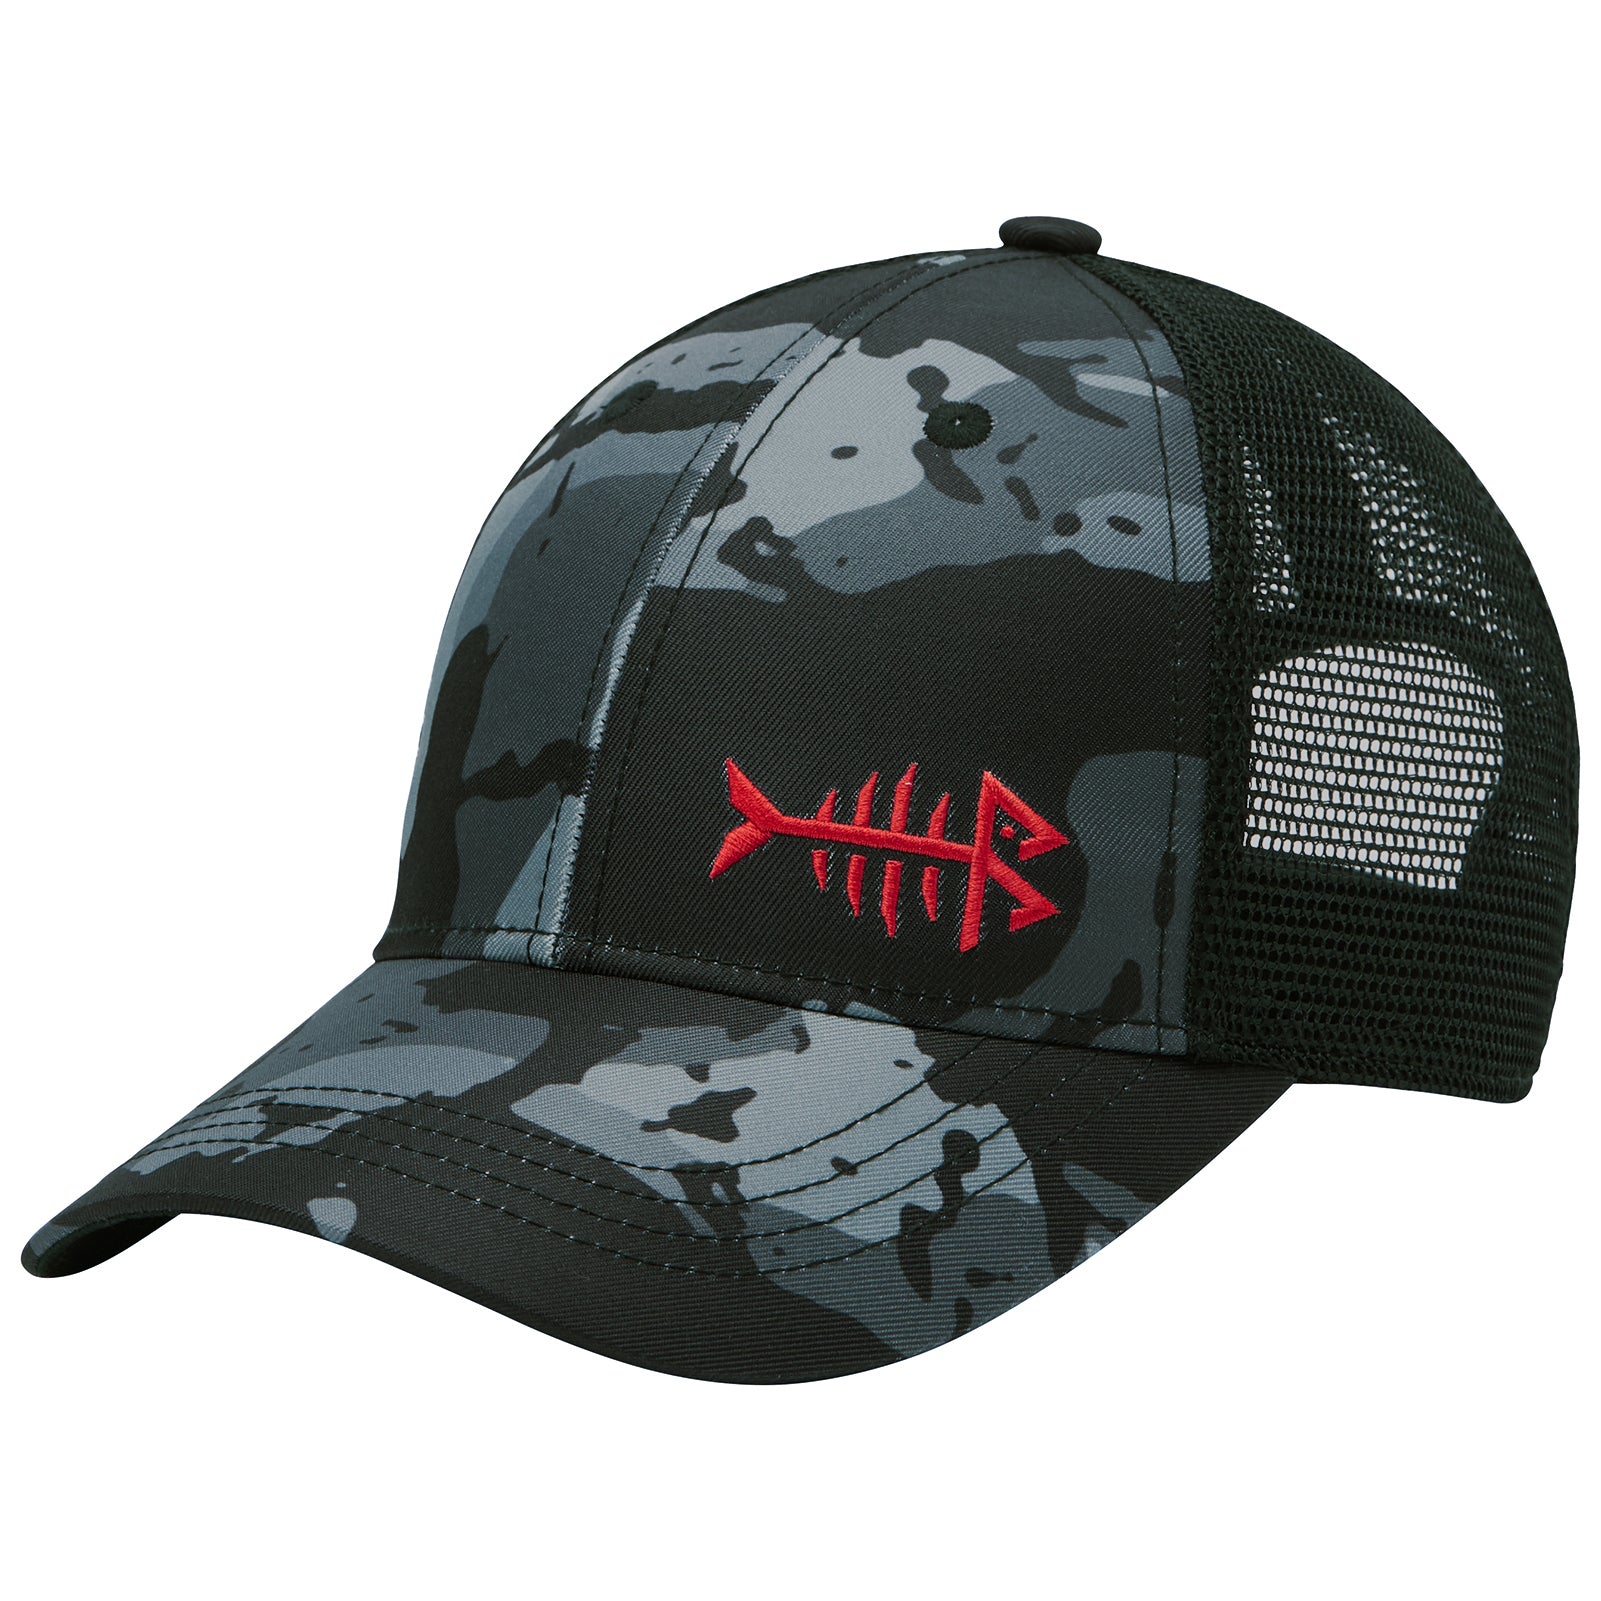 Ball Caps New Mens 3D Embroidery Baseball Cap Fitted Cap Fishing